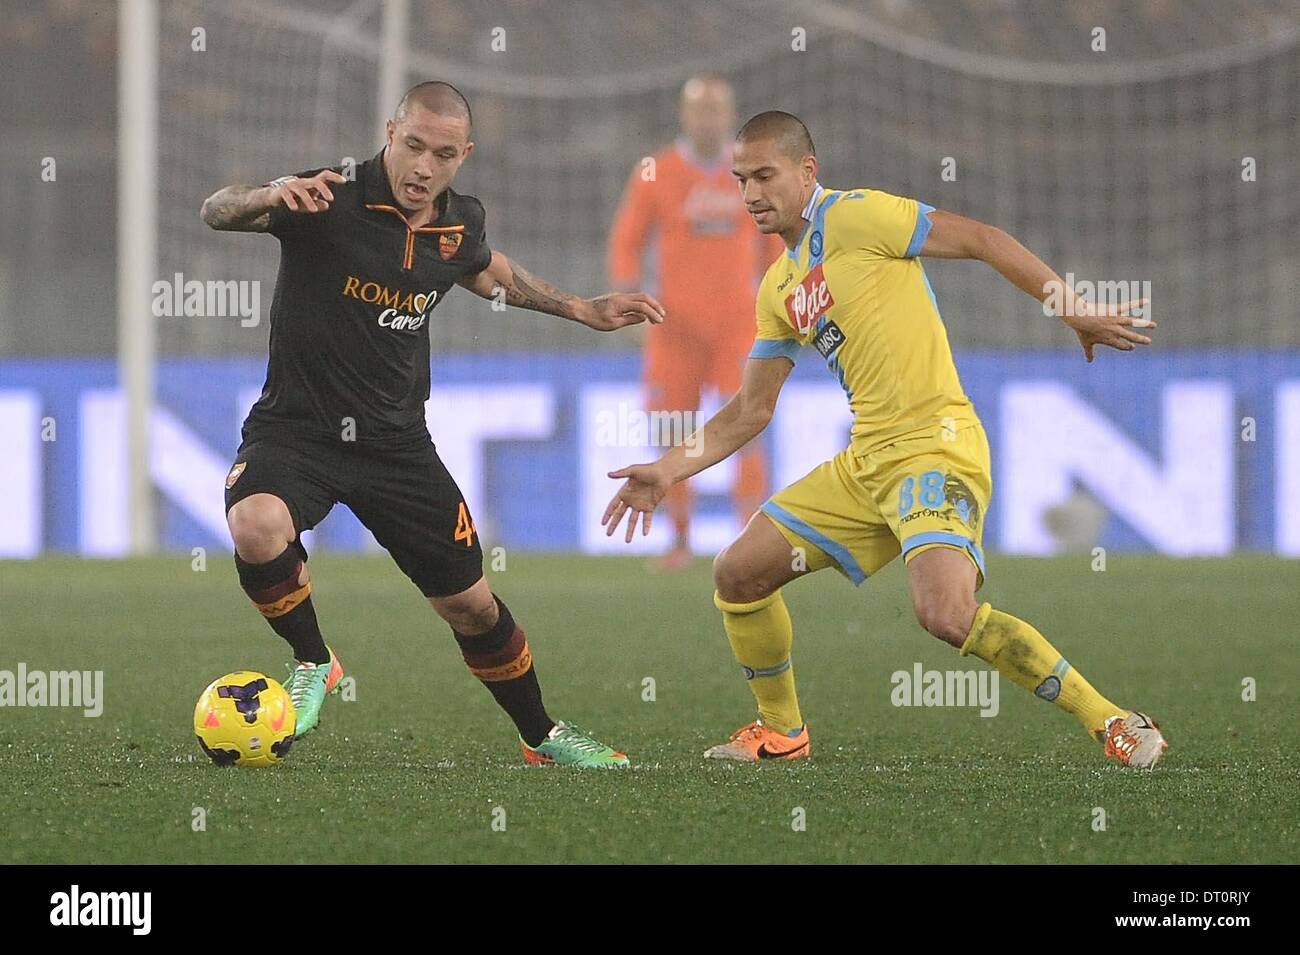 Rome, Italy. 5th Feb, 2014. Rome, Italy - 5th Feb, 2014. Radja Nainggolan and Gokhan Inler in action during. Football / Soccer : Italian TIM Cup match between AS Roma and SSC Napoli at Stadio Olimpico in Rome, Italy. Credit:  Giuseppe Maffia/NurPhoto/ZUMAPRESS.com/Alamy Live News Stock Photo